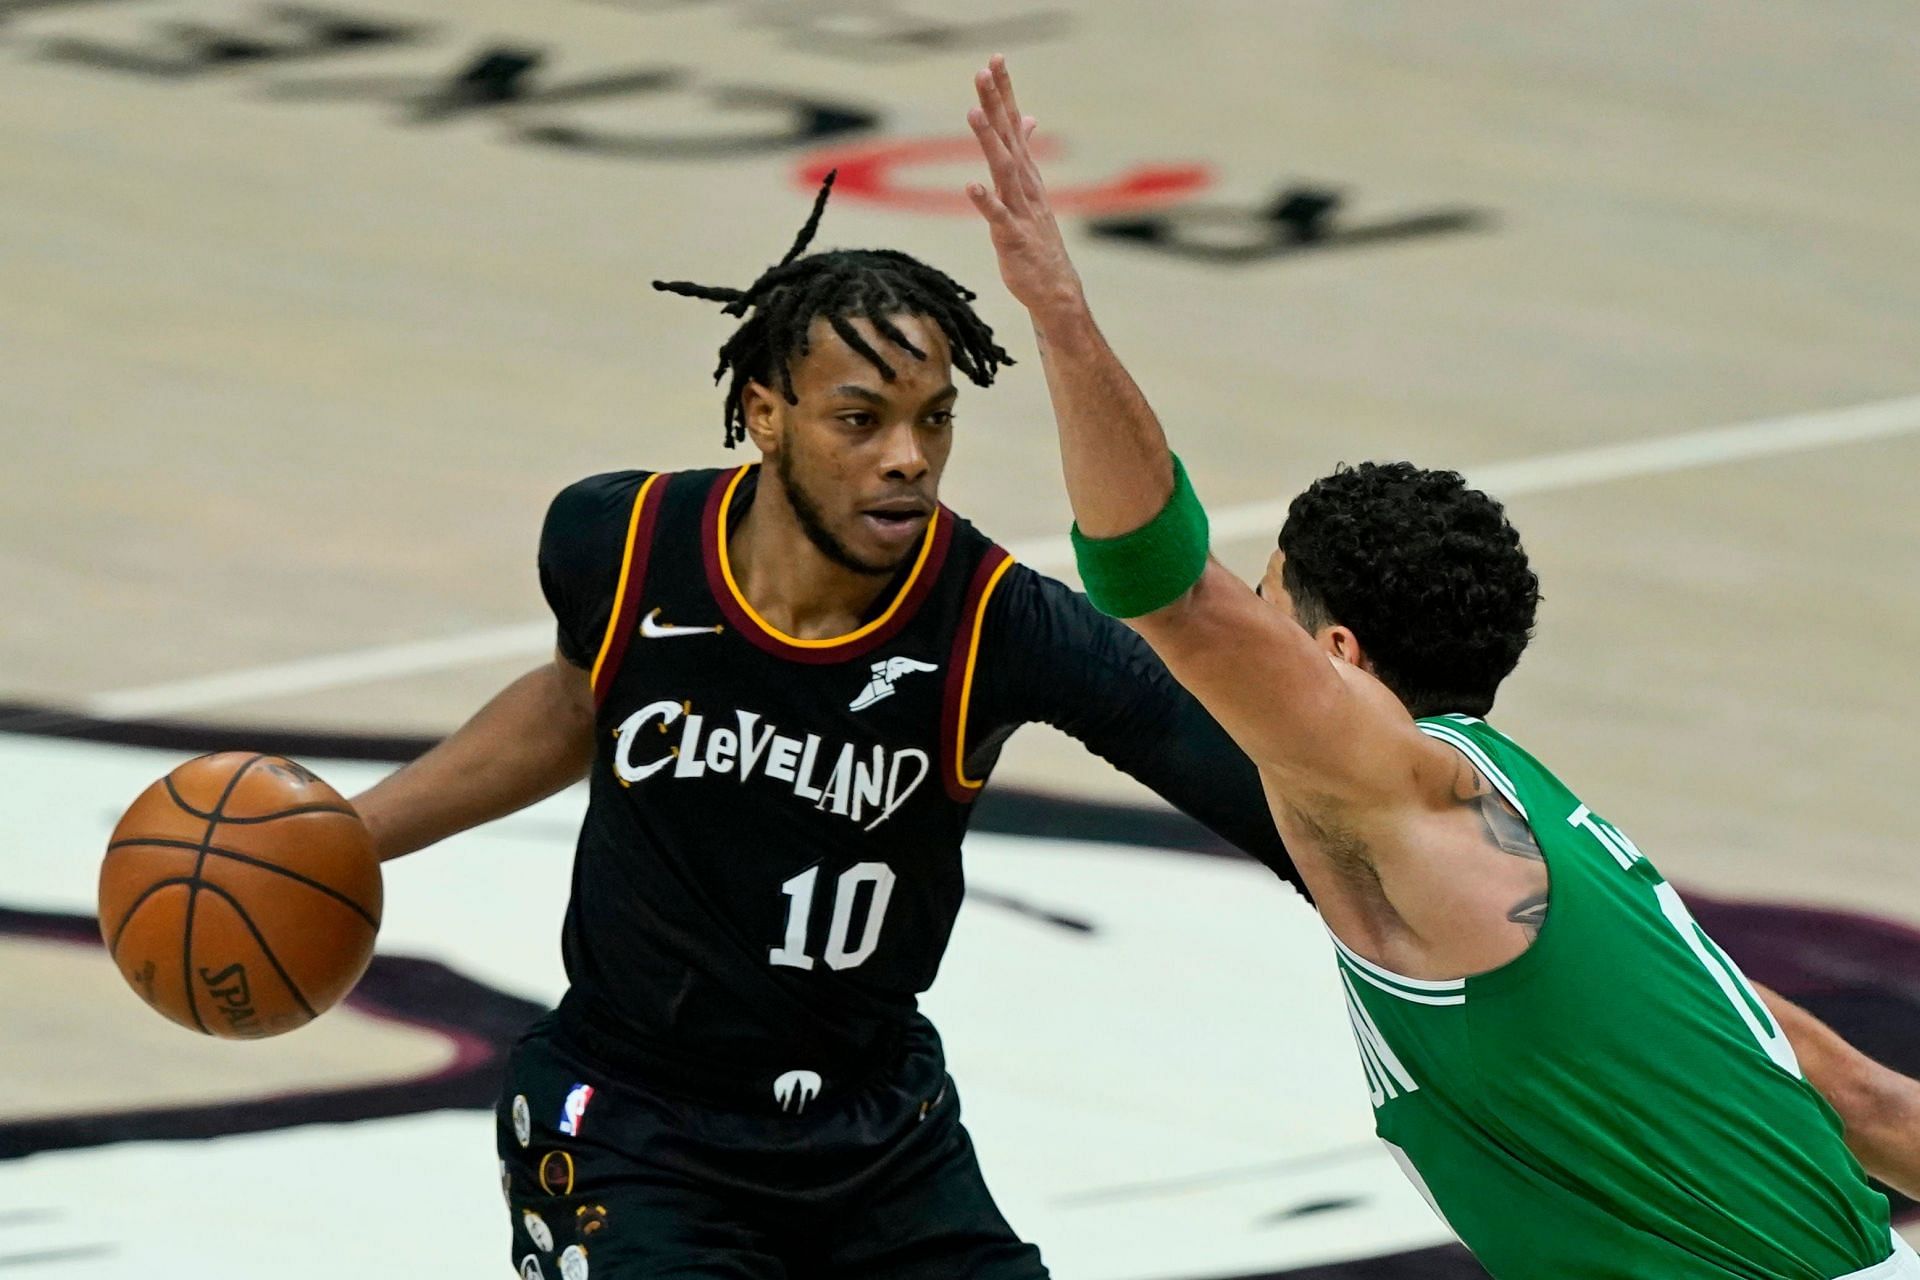 The Boston Celtics and the Cleveland Cavaliers will meet for the first time this season on Saturday [Photo: Akron Beacon Journal]